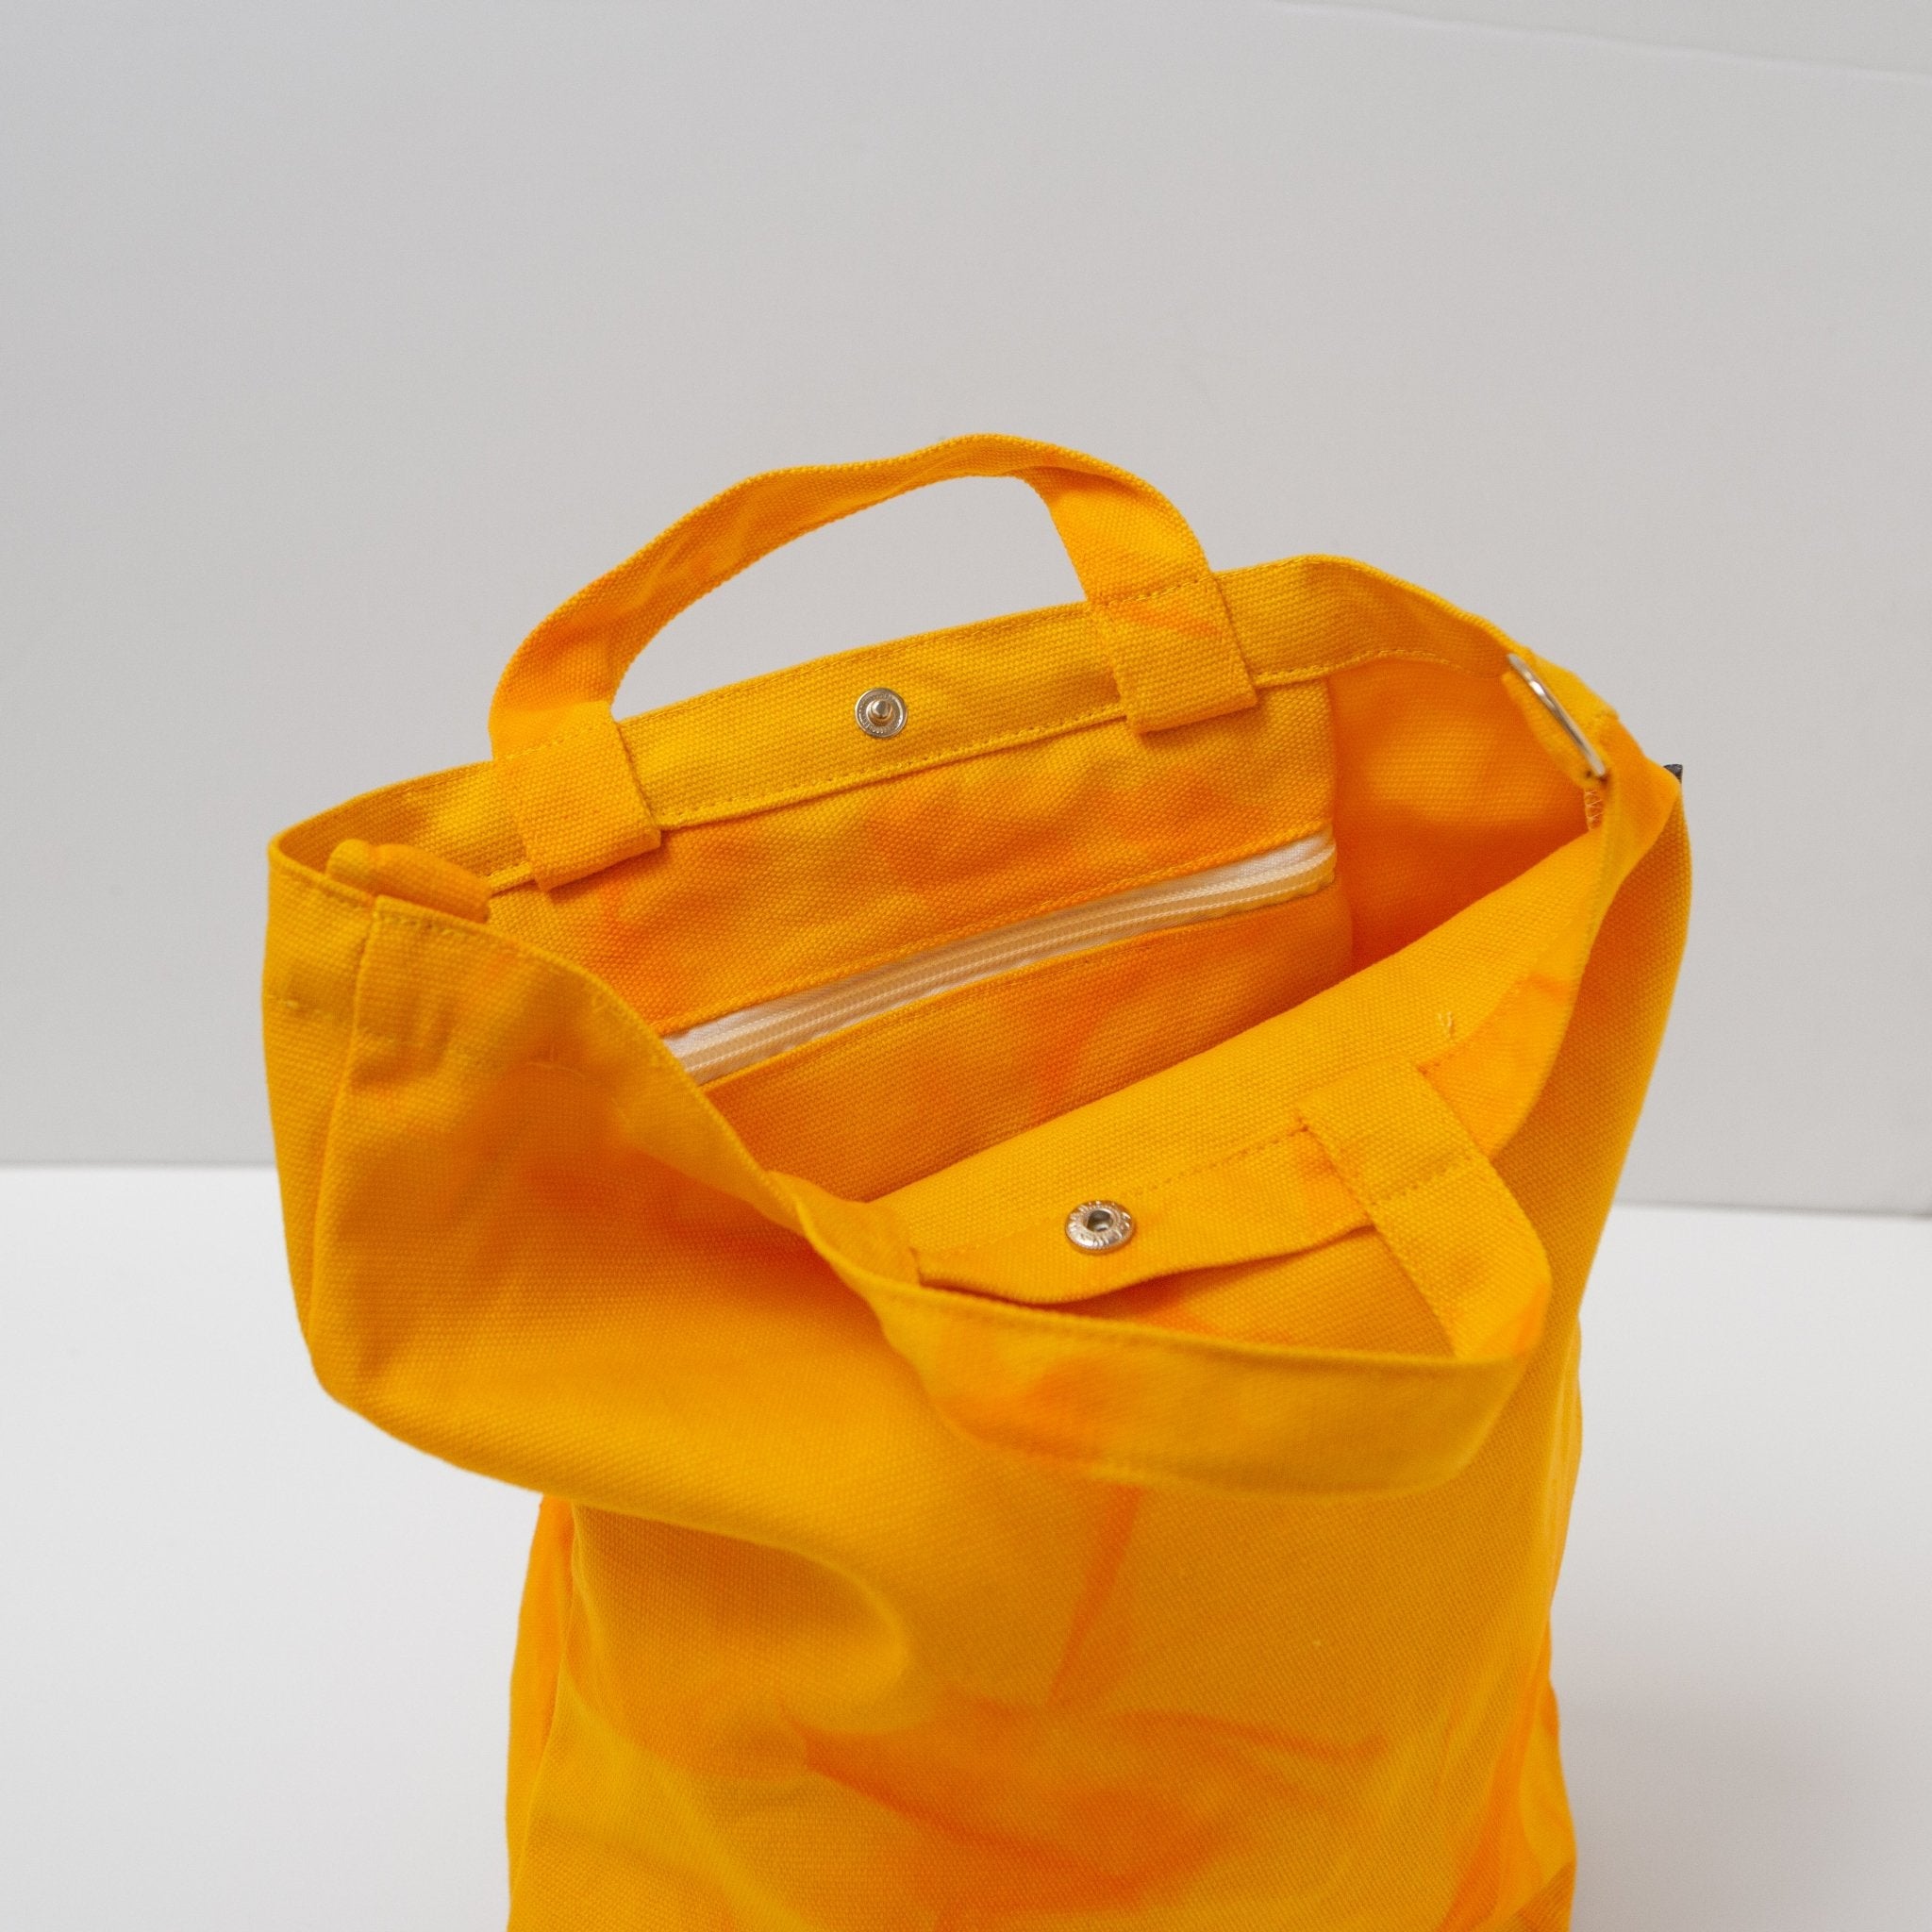 a tie dyed canvas tote in a bright yellow color with orange dye